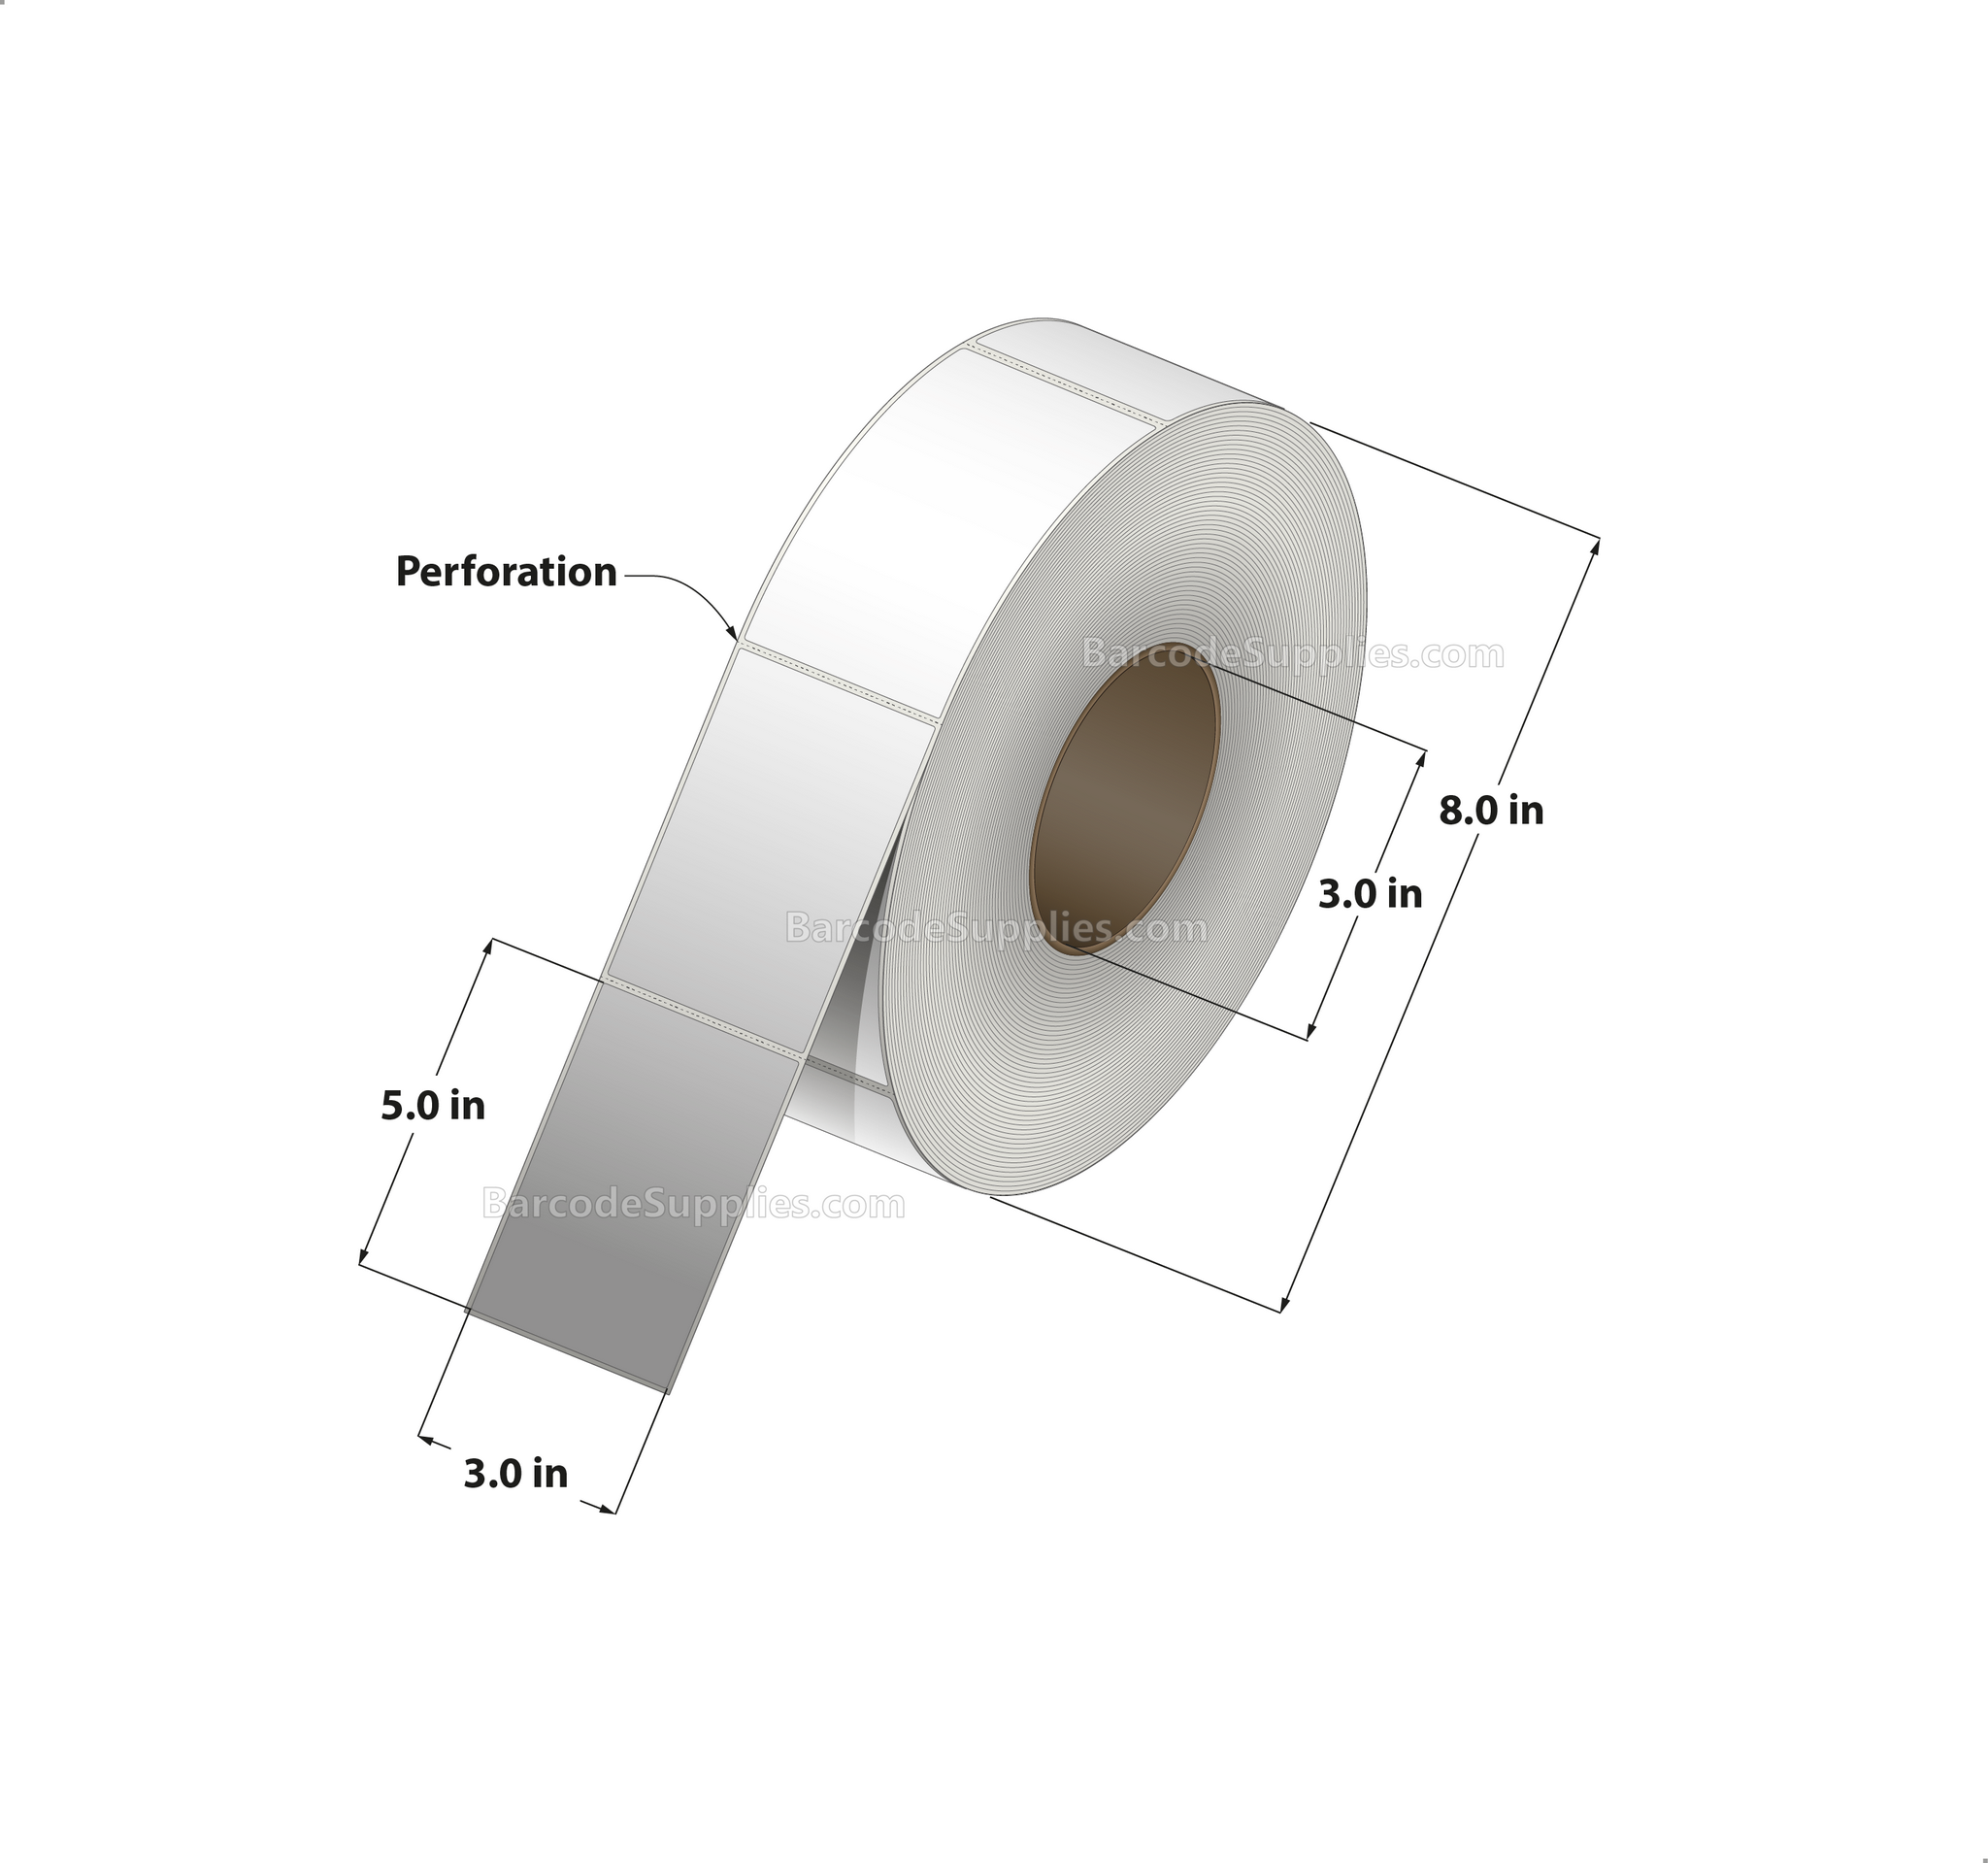 3 x 5 Thermal Transfer White Labels With Removable Adhesive - Perforated - 1200 Labels Per Roll - Carton Of 8 Rolls - 9600 Labels Total - MPN: RE-3-5-1200-3